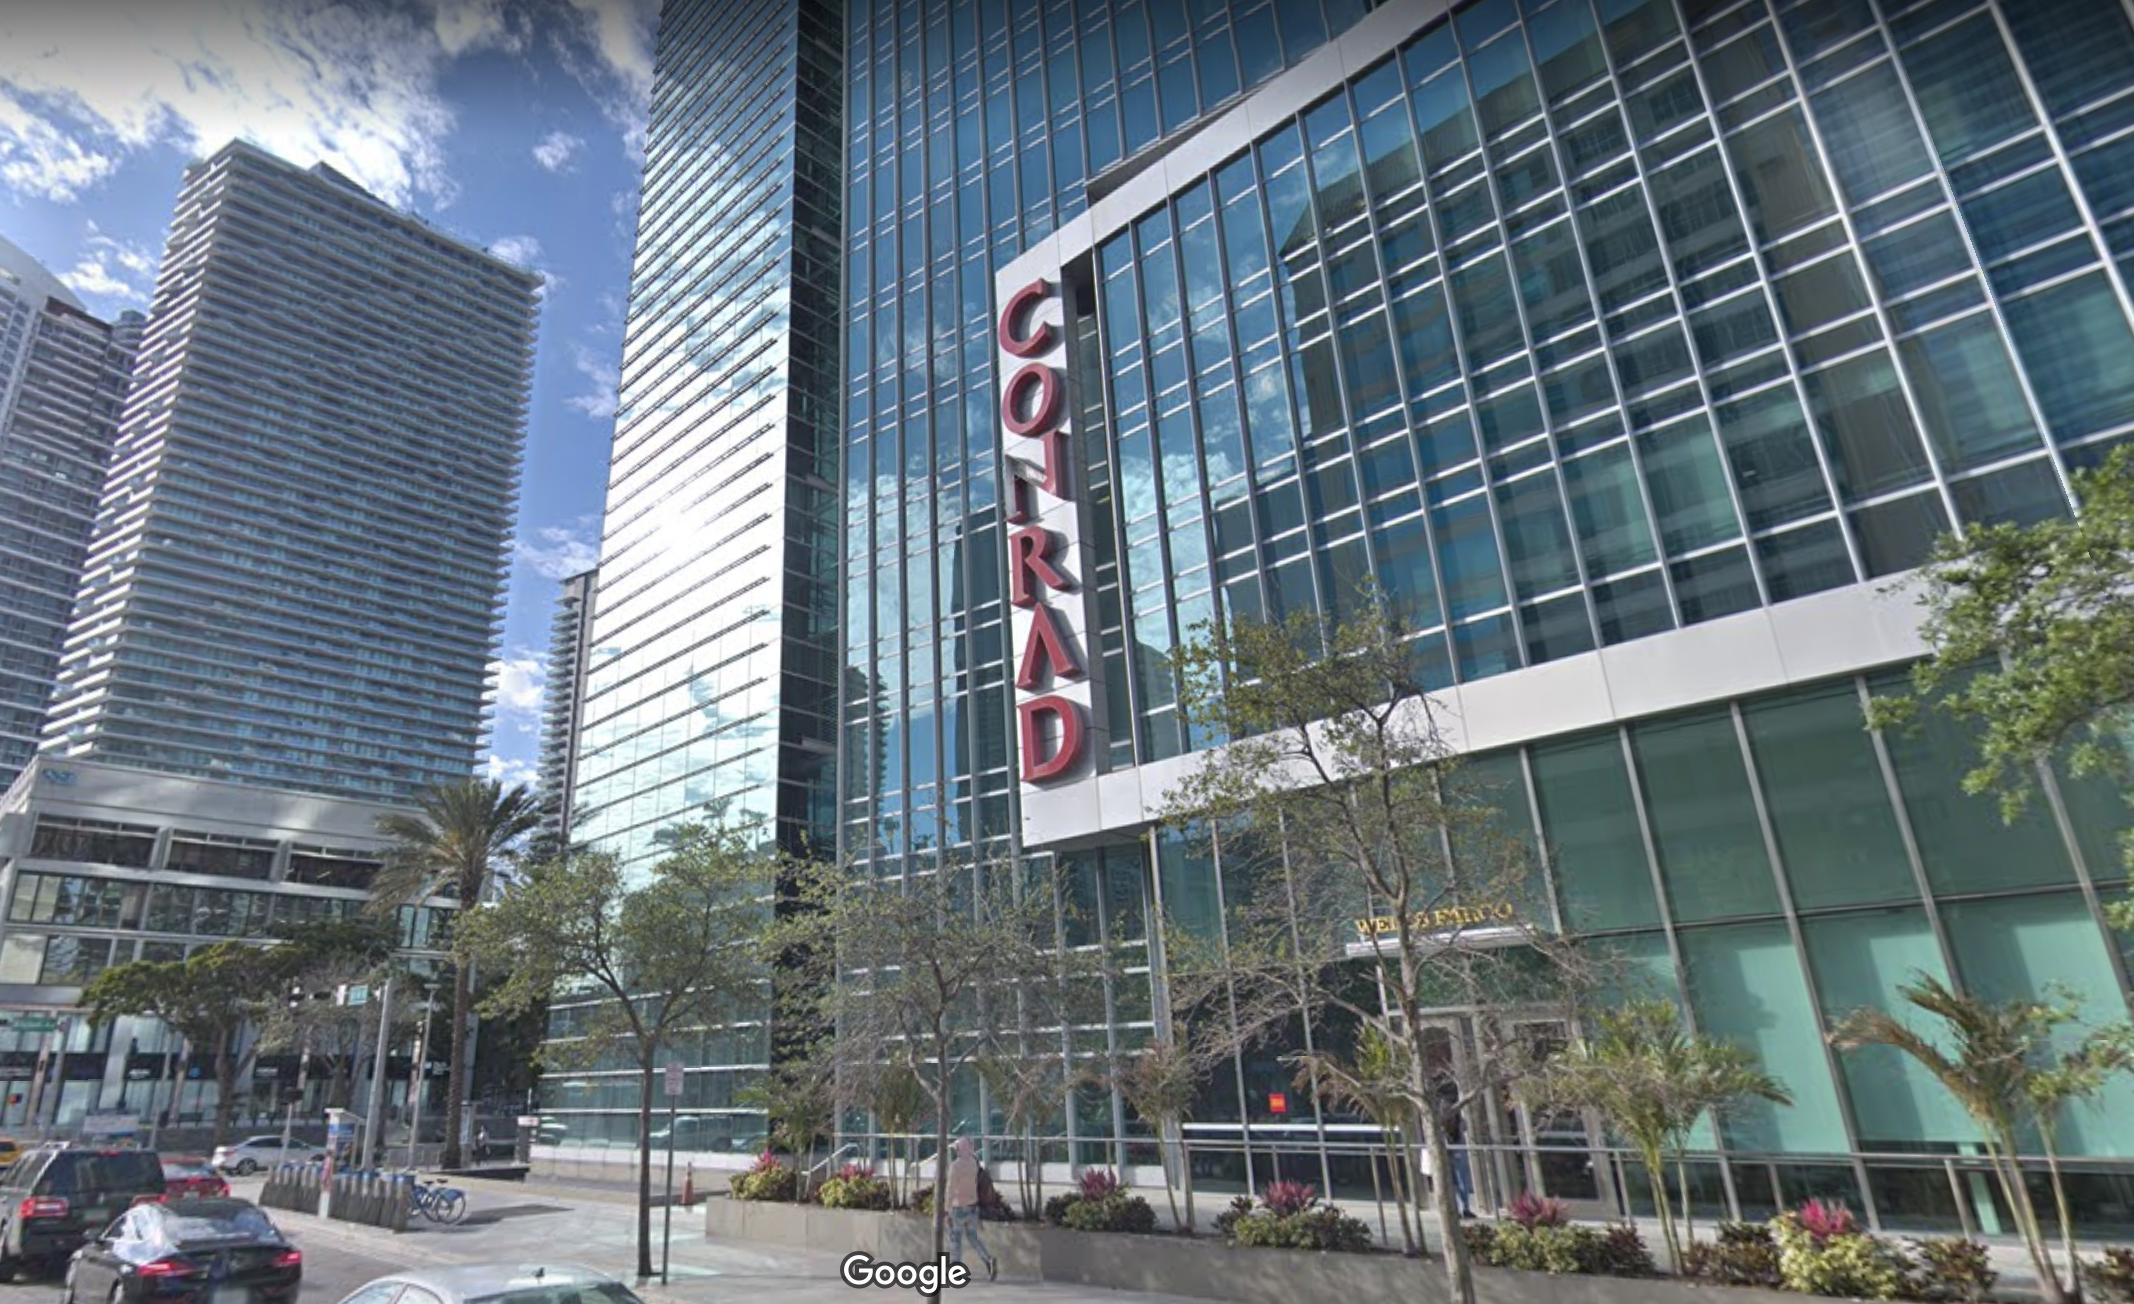 The woman worked at the Conrad Miami until 2016